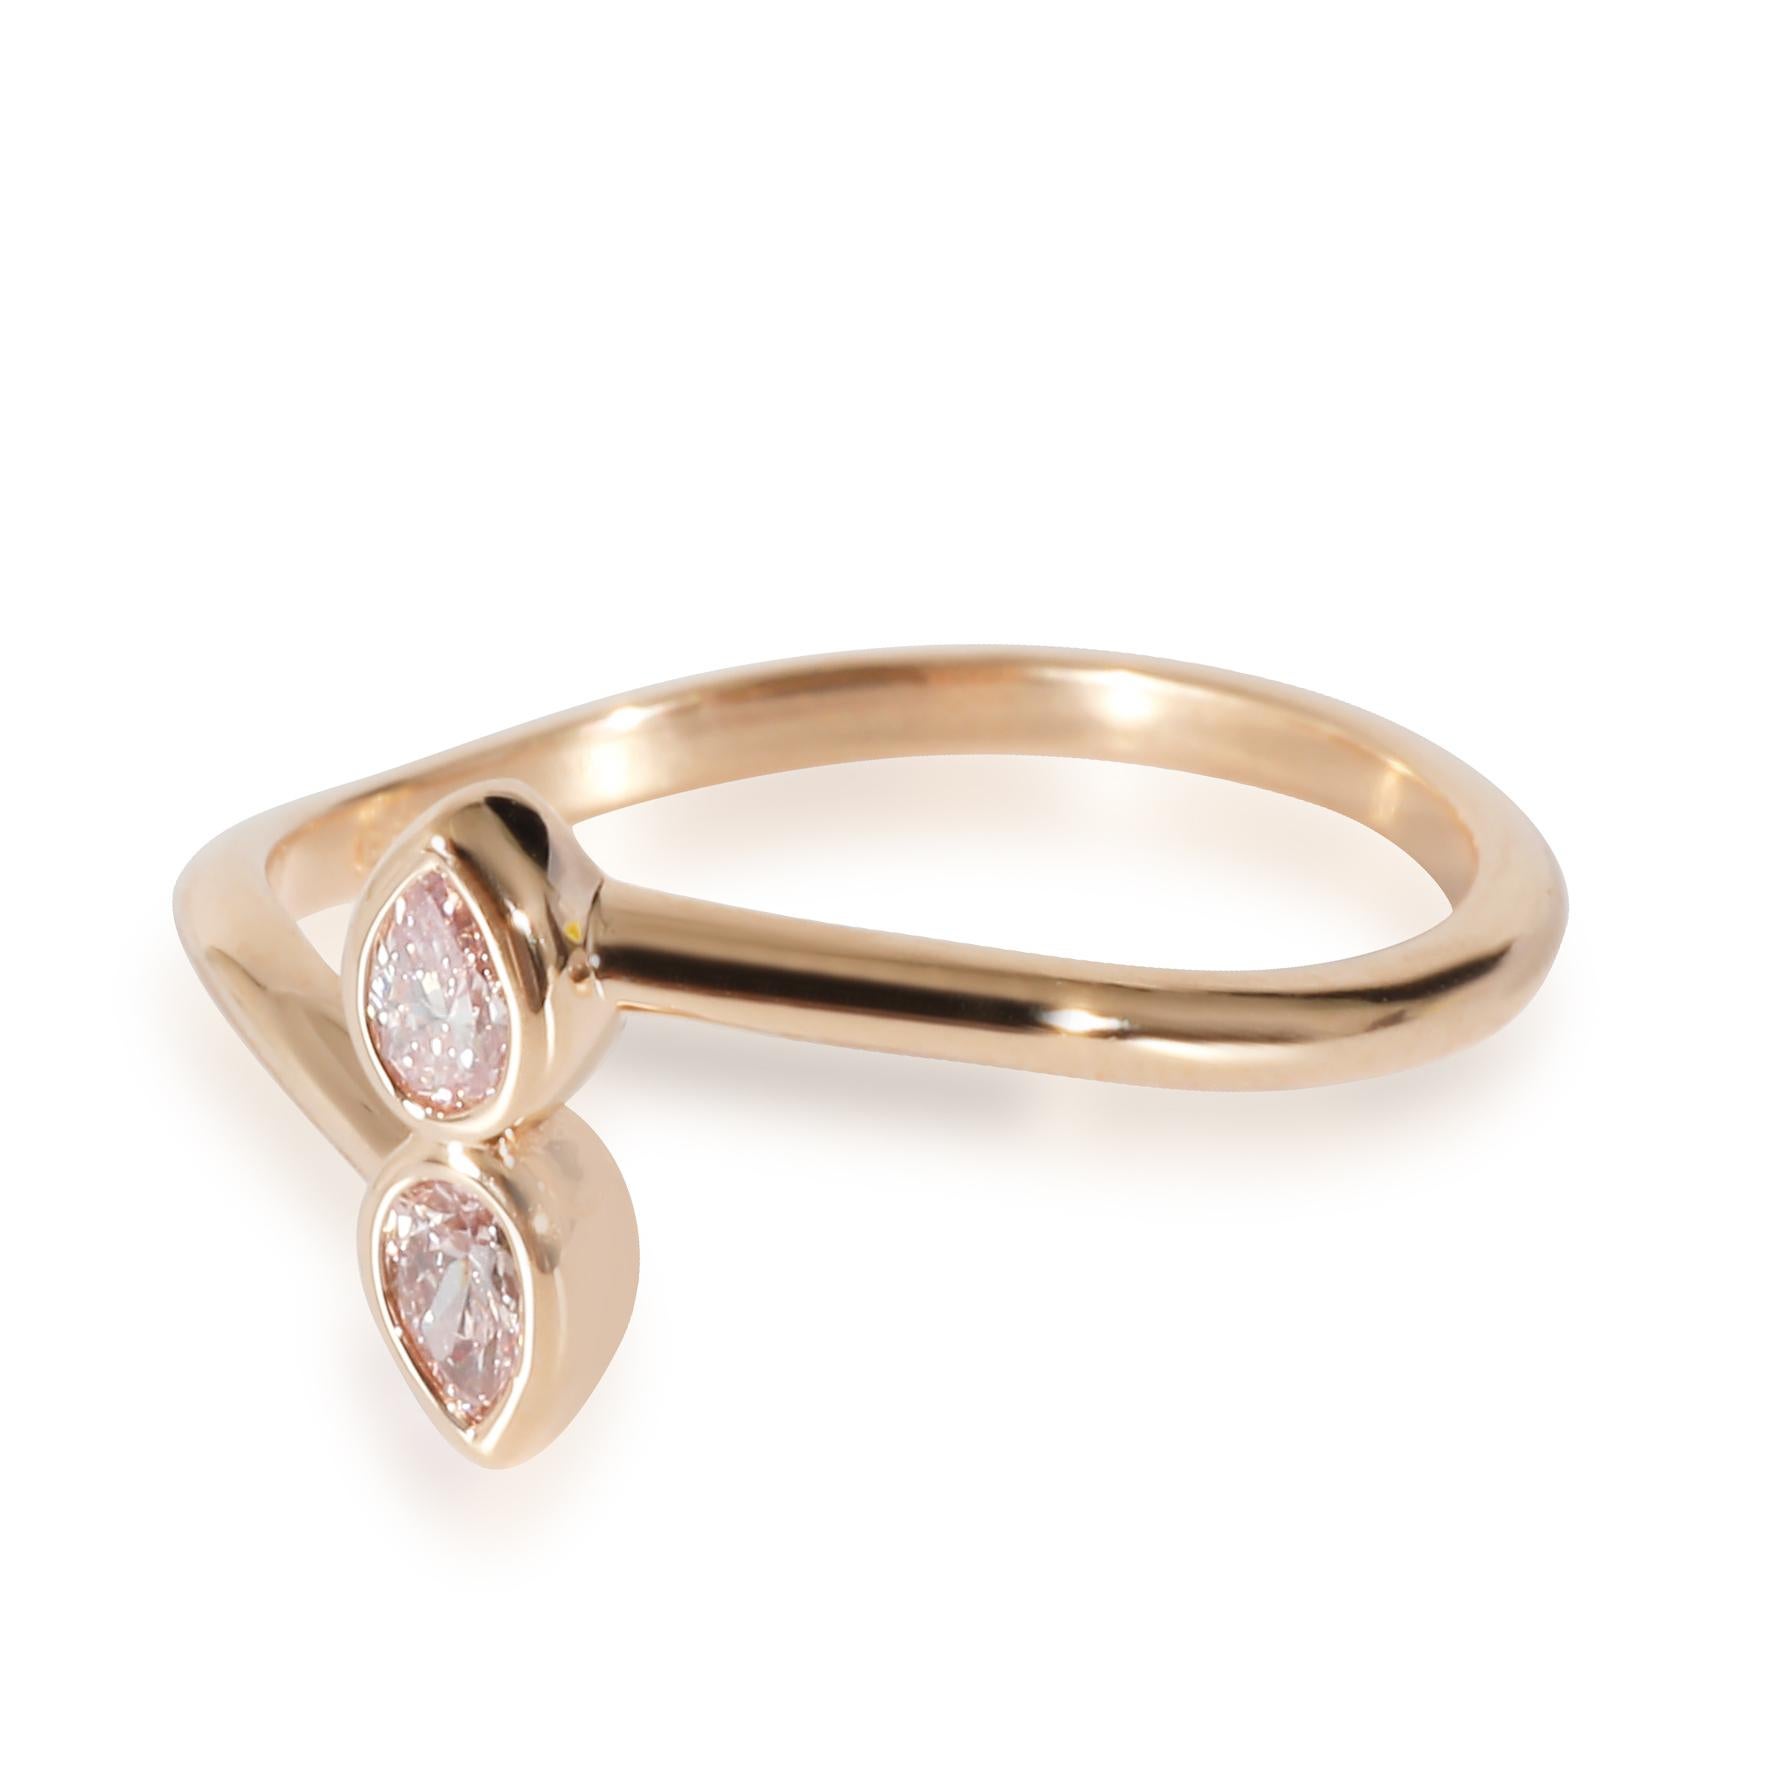 Pink Pear Shaped Diamonds Mirror Ring in 18K Rose Gold, 0.16 Ctw In Excellent Condition For Sale In New York, NY